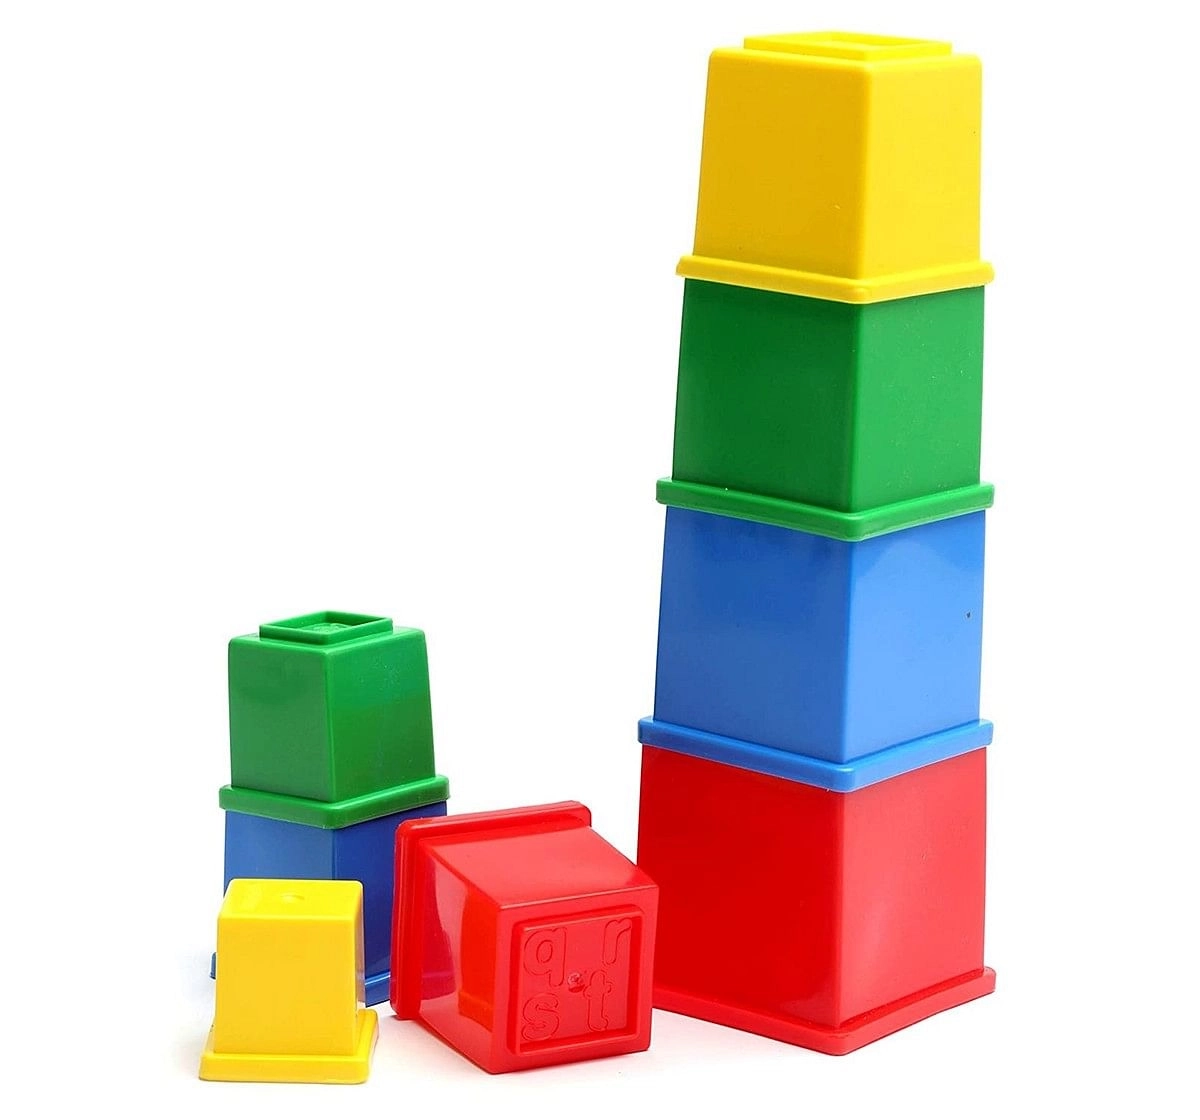 Giggles Stacking Cubes Learning Toy for Kids age 12M+